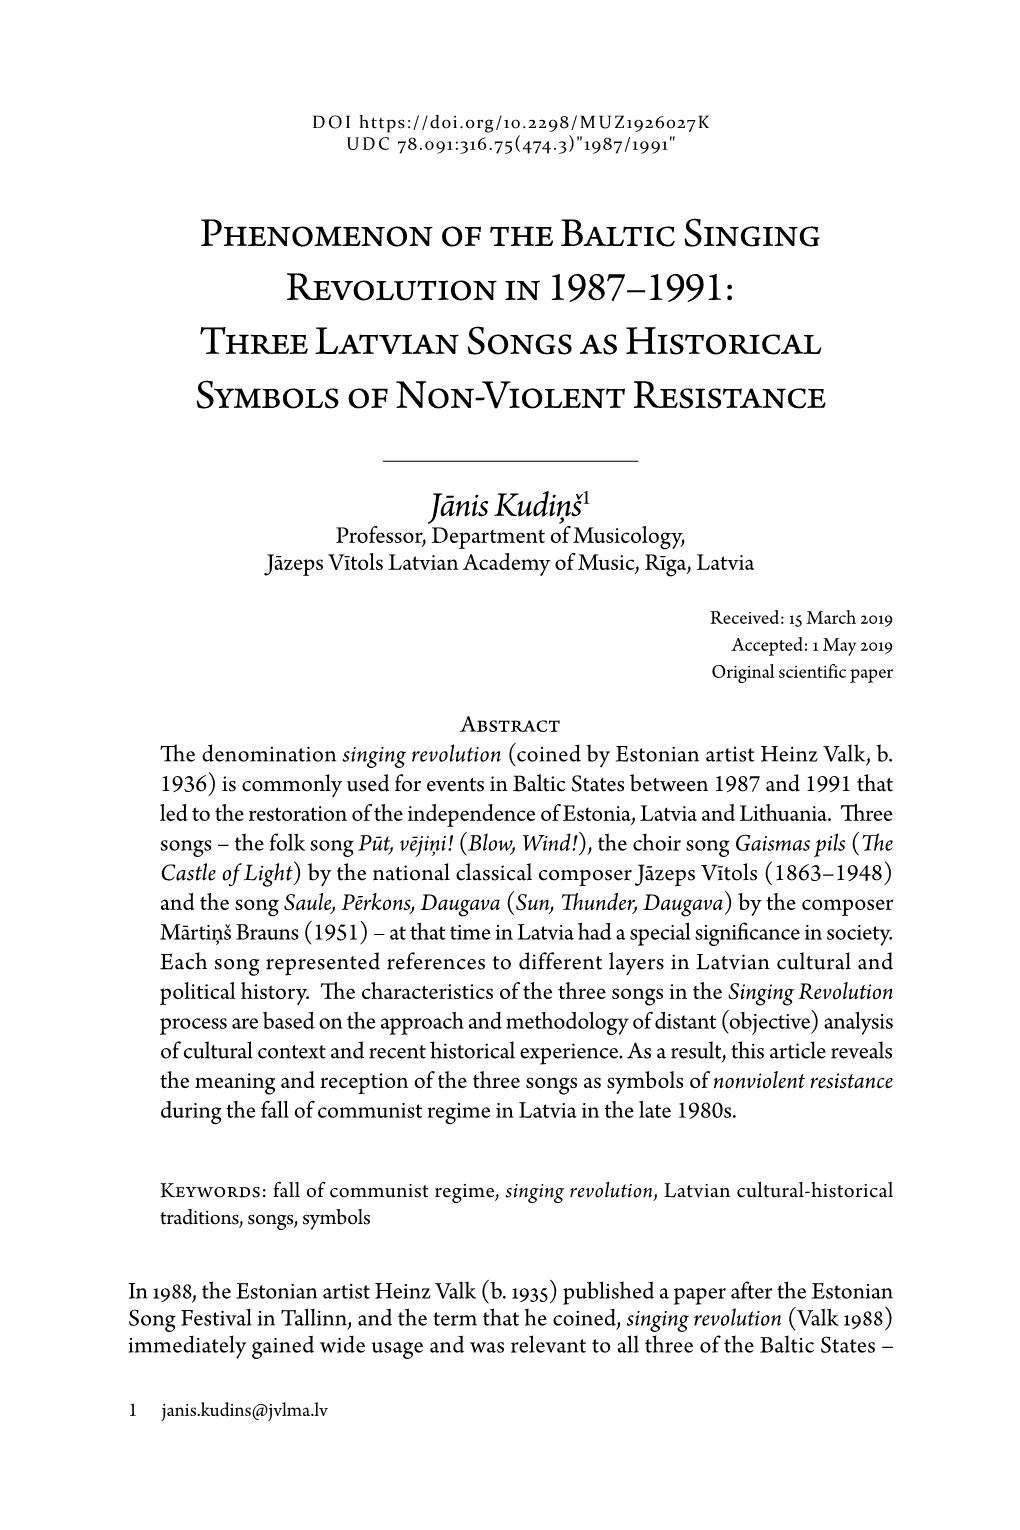 Phenomenon of the Baltic Singing Revolution in 1987–1991: Three Latvian Songs As Historical Symbols of Non-Violent Resistance